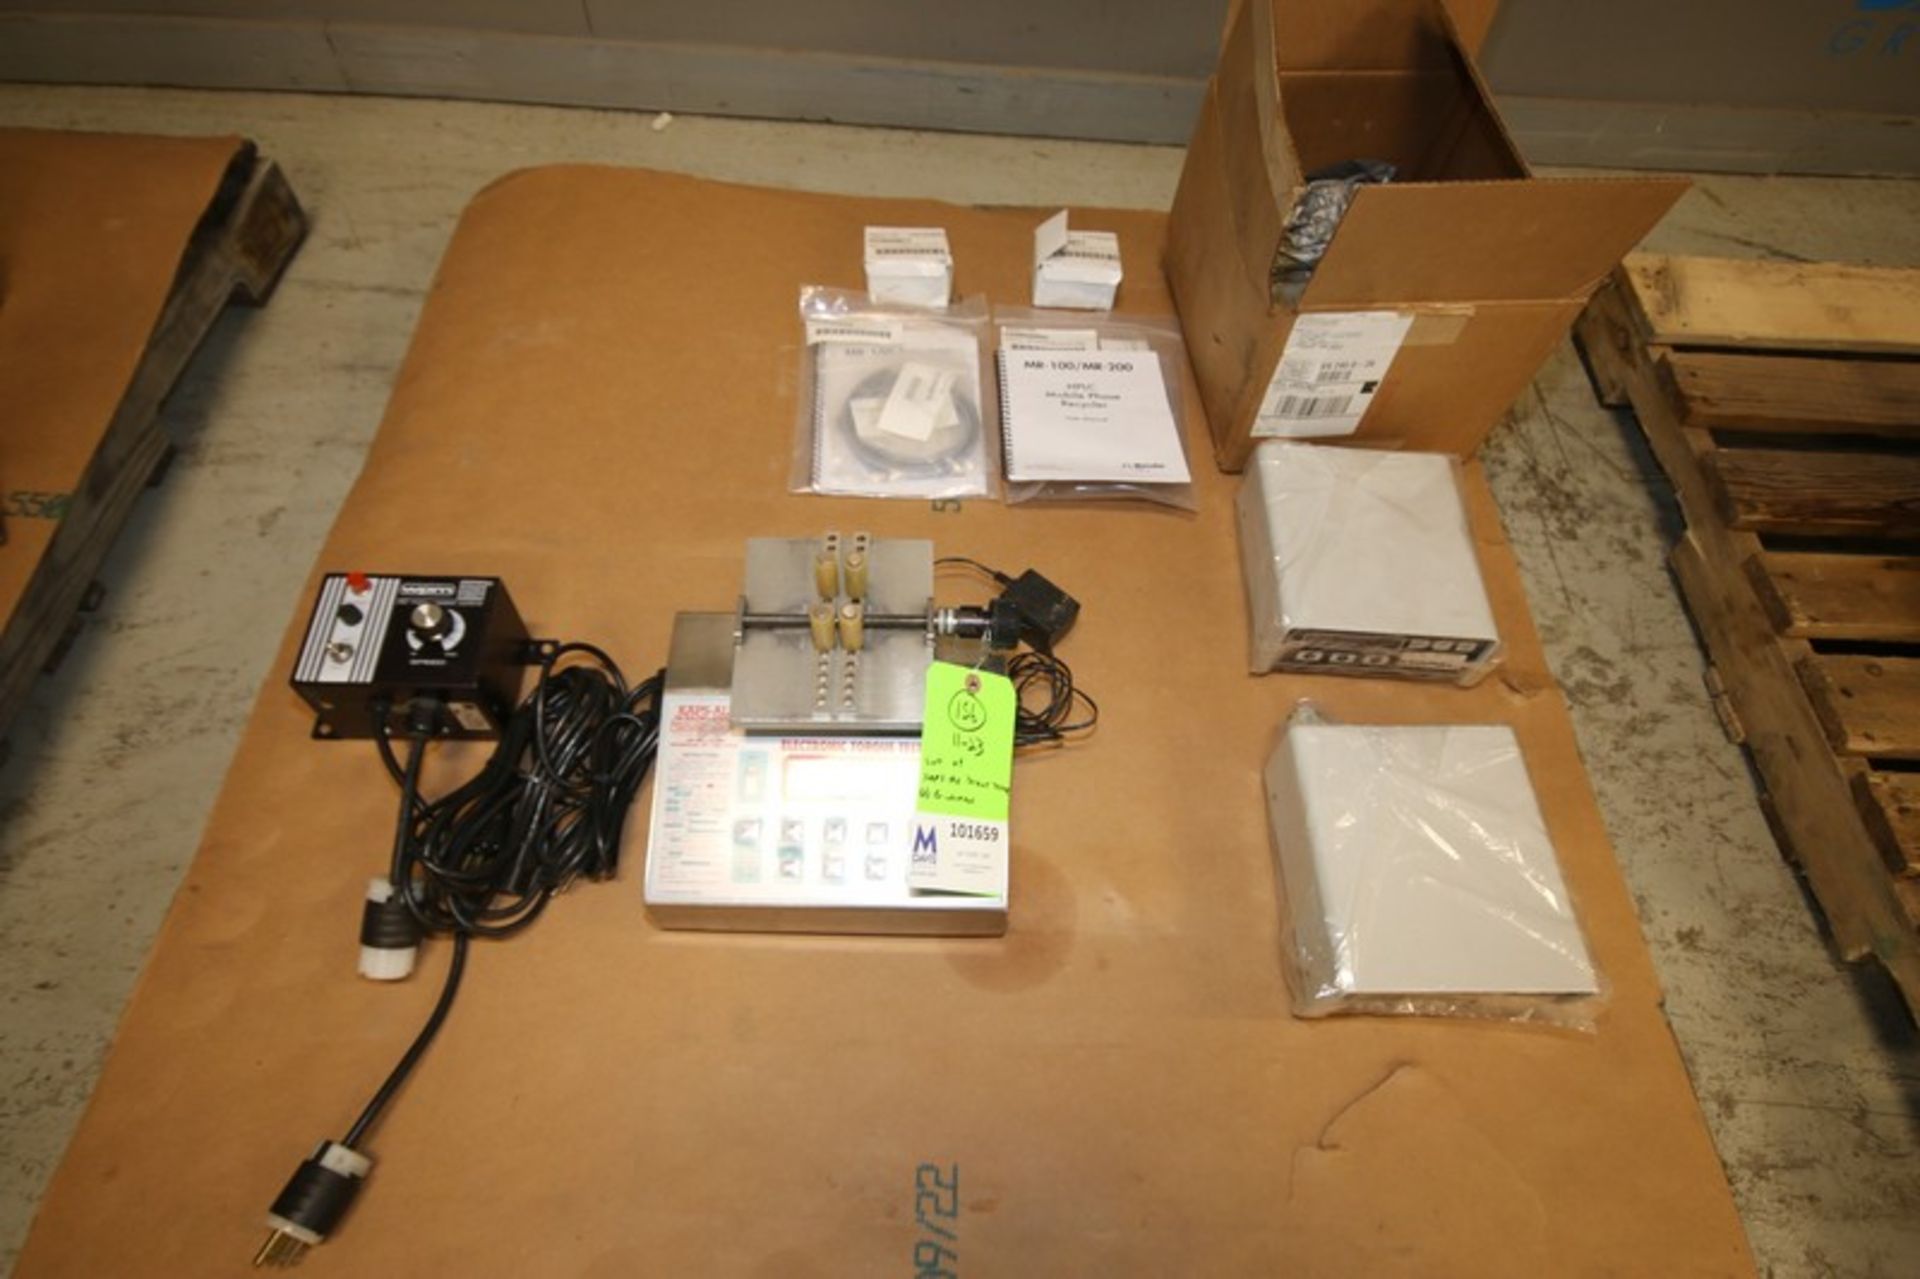 Lot of Assorted Items Including Kaps - All Electronic Torque Tester, WPM Motor Speed Controller & (